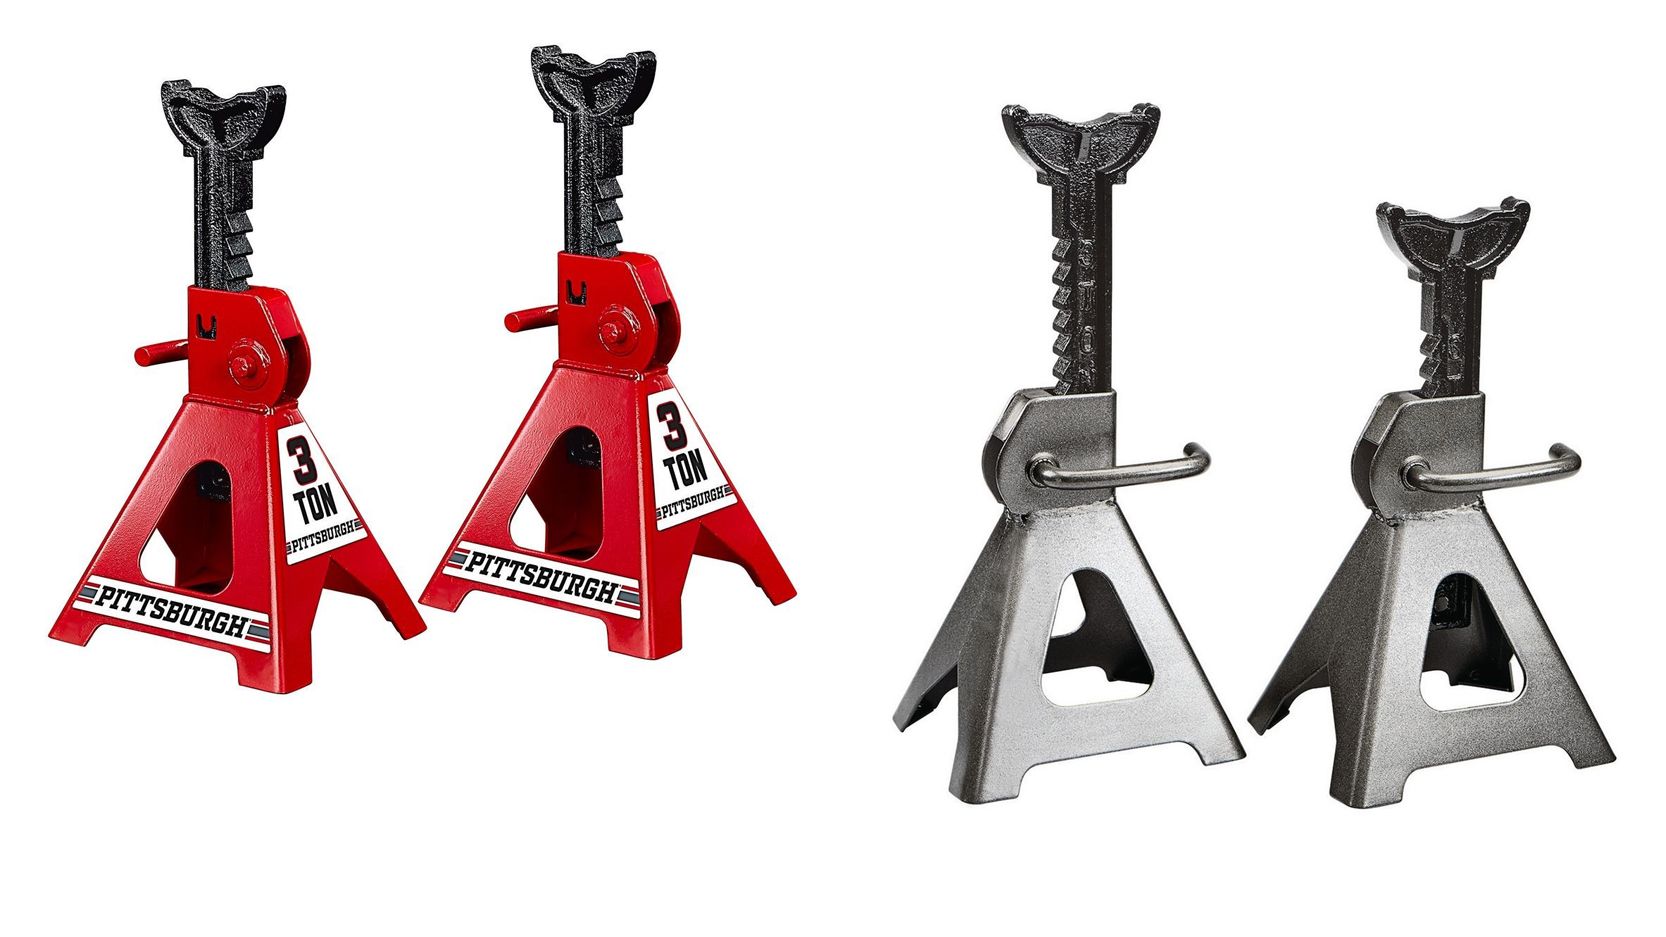 Harbor Freight Jack Stands Recalled for Failure Risk; Check Yours Now